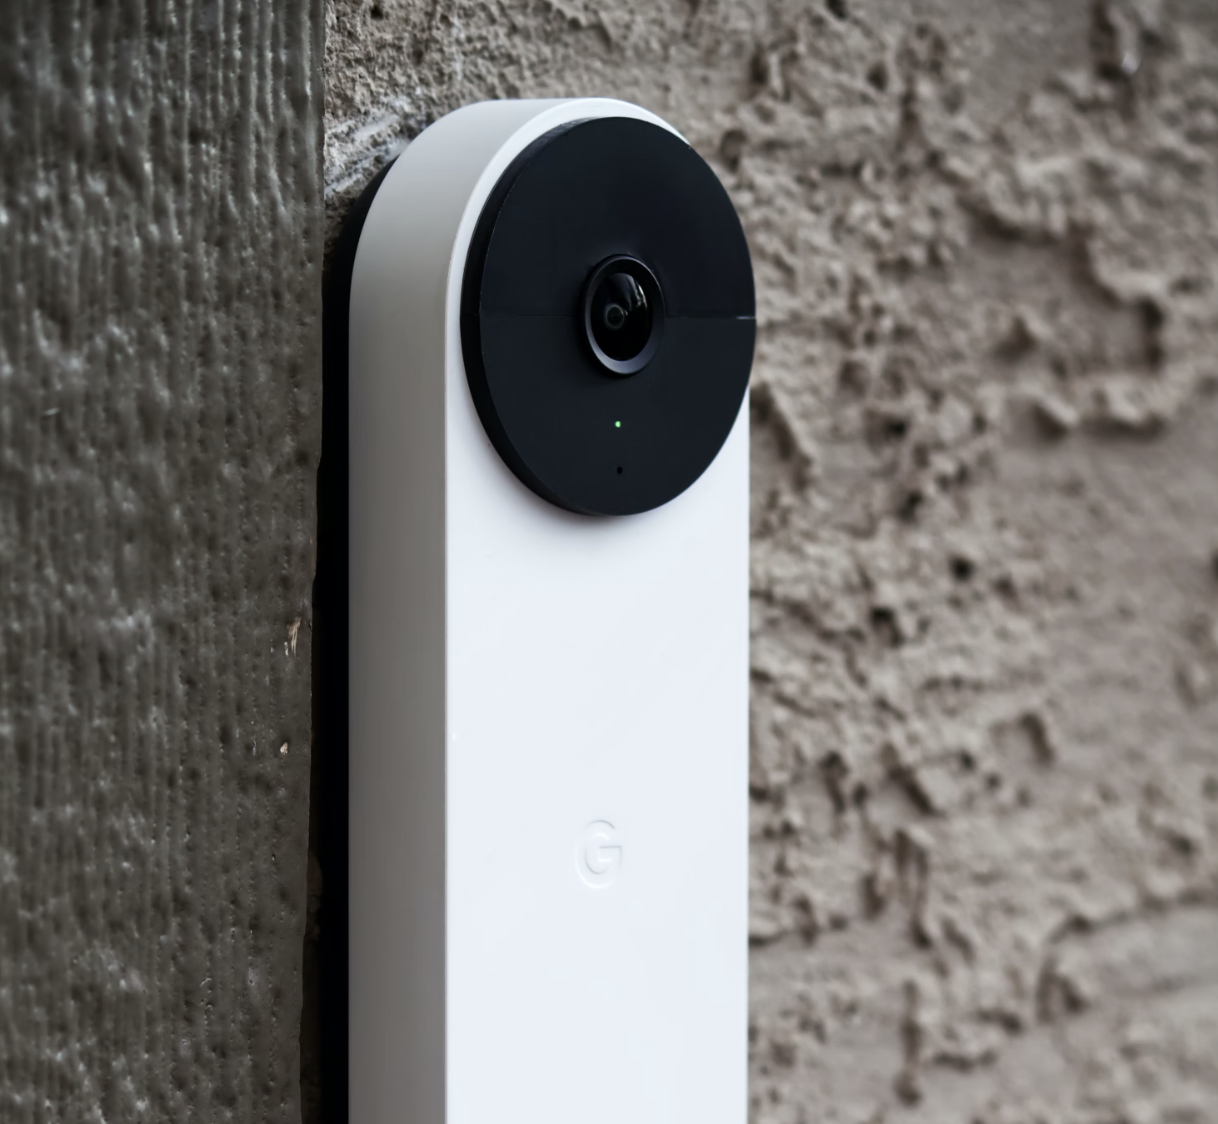 Amazon's Top Rated Home Security Systems and Accessories